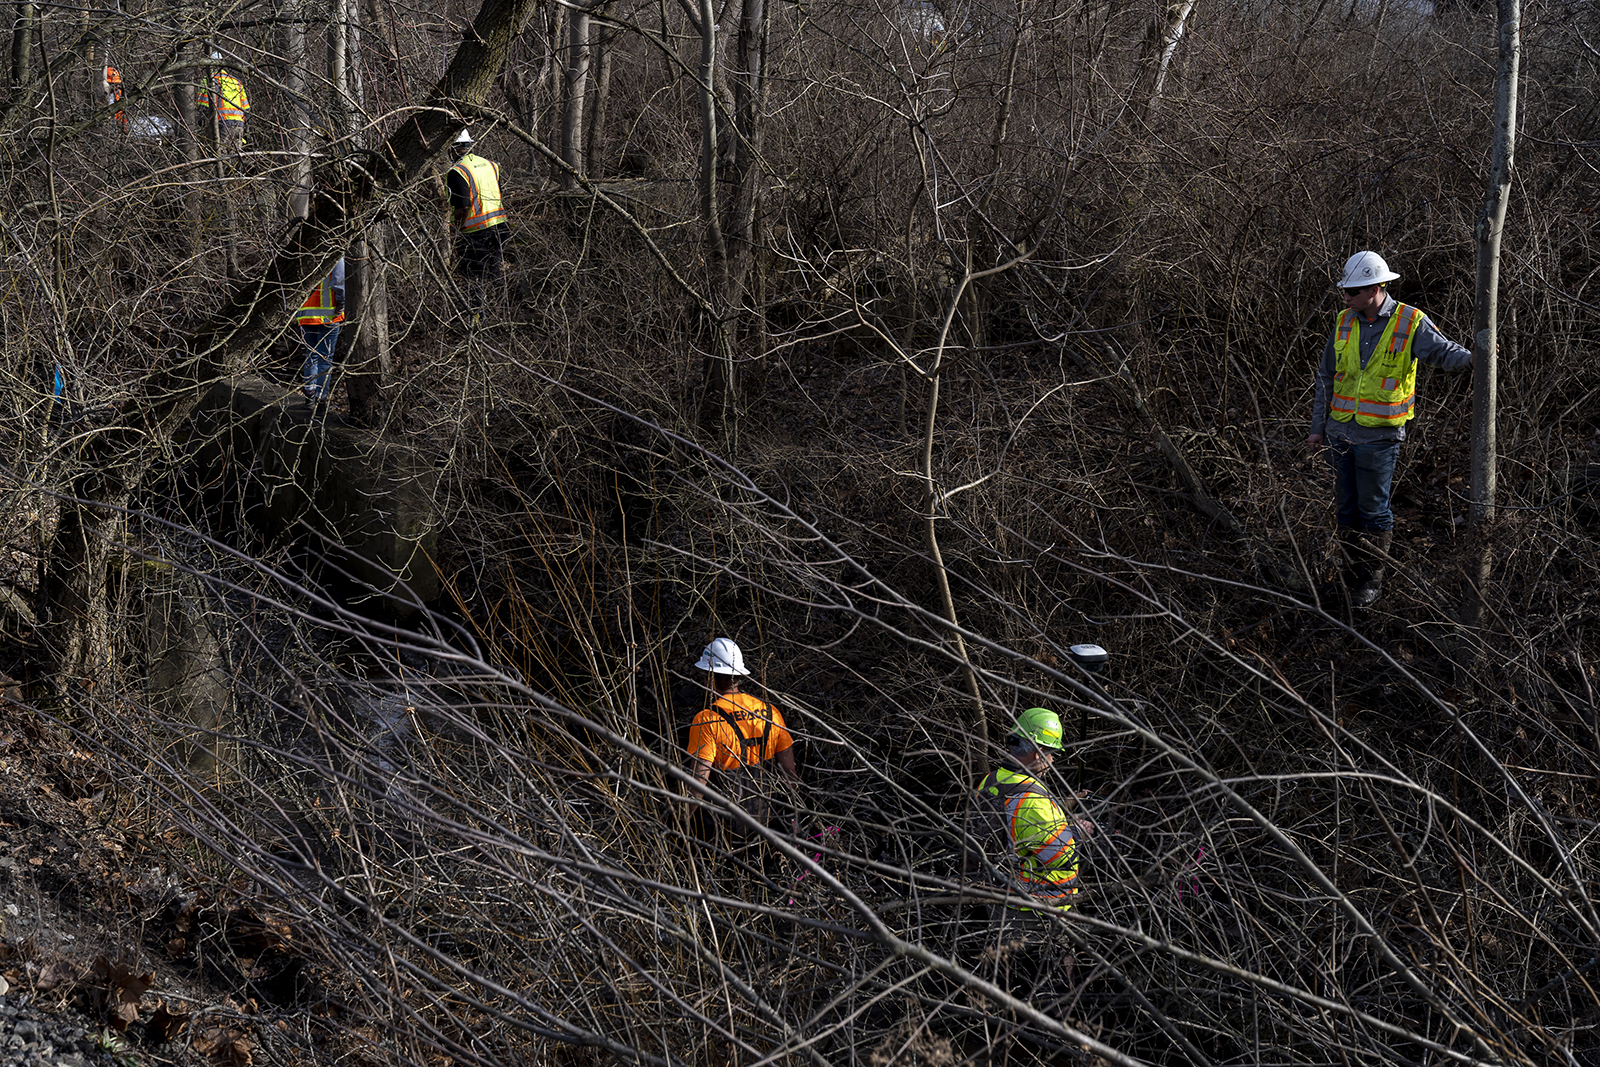 Ohio EPA and other clean-up crews work in Sulphur Run creek on February 23 in East Palestine, Ohio